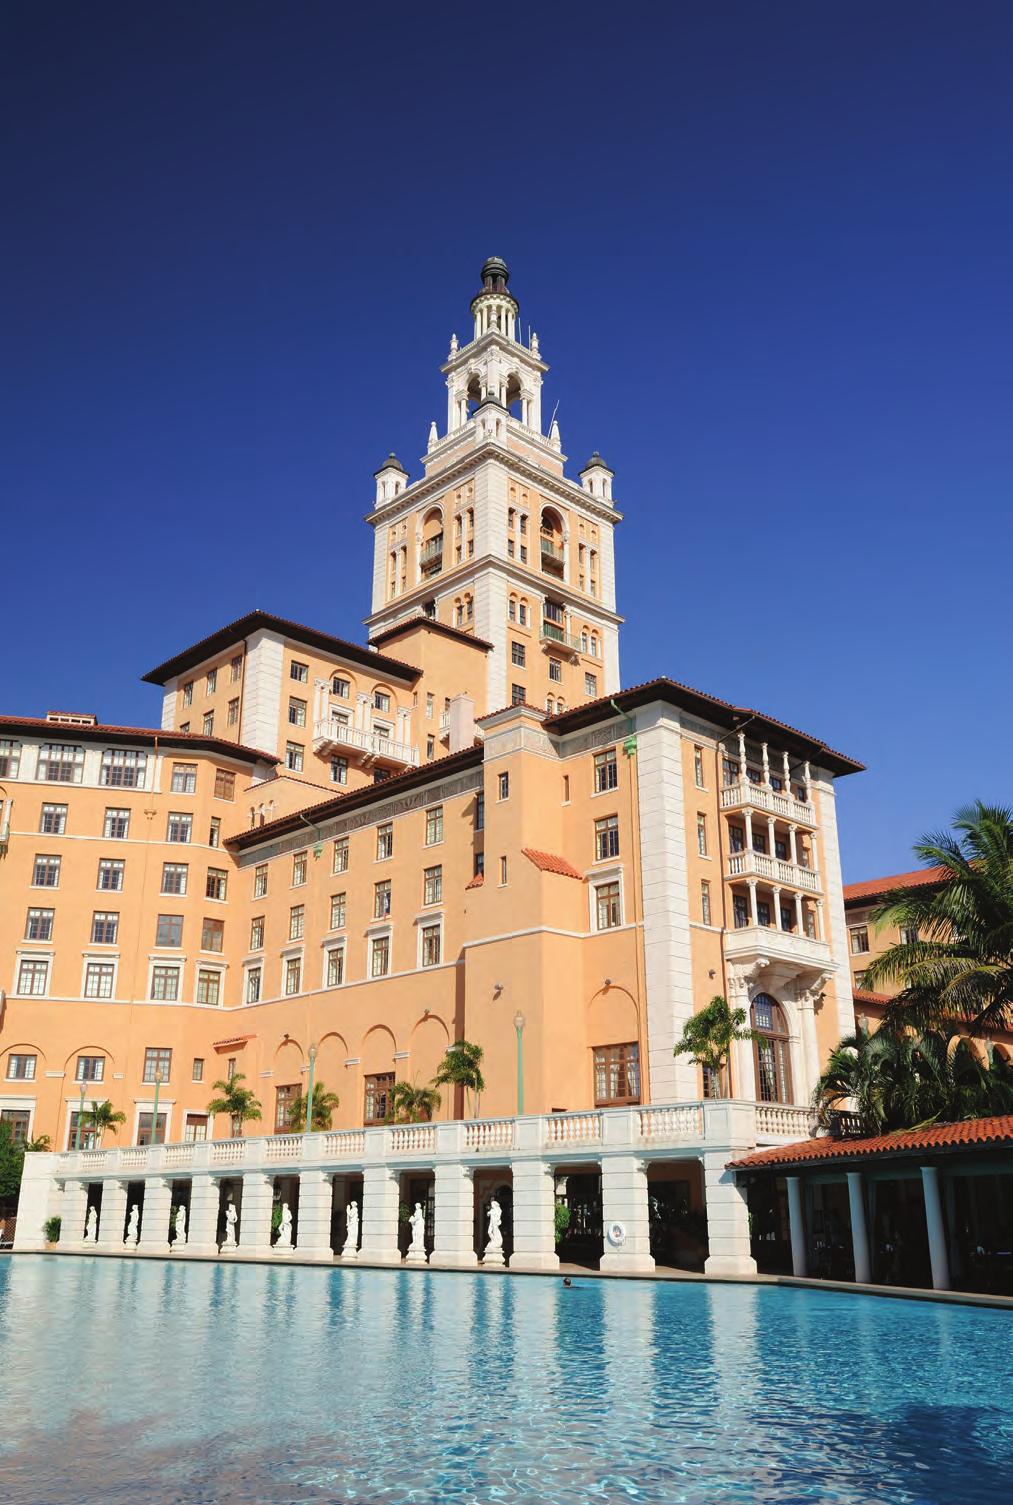 PREMIER MEMBERSHIP - BILTMORE HOTEL Be a part of the club that has it all.